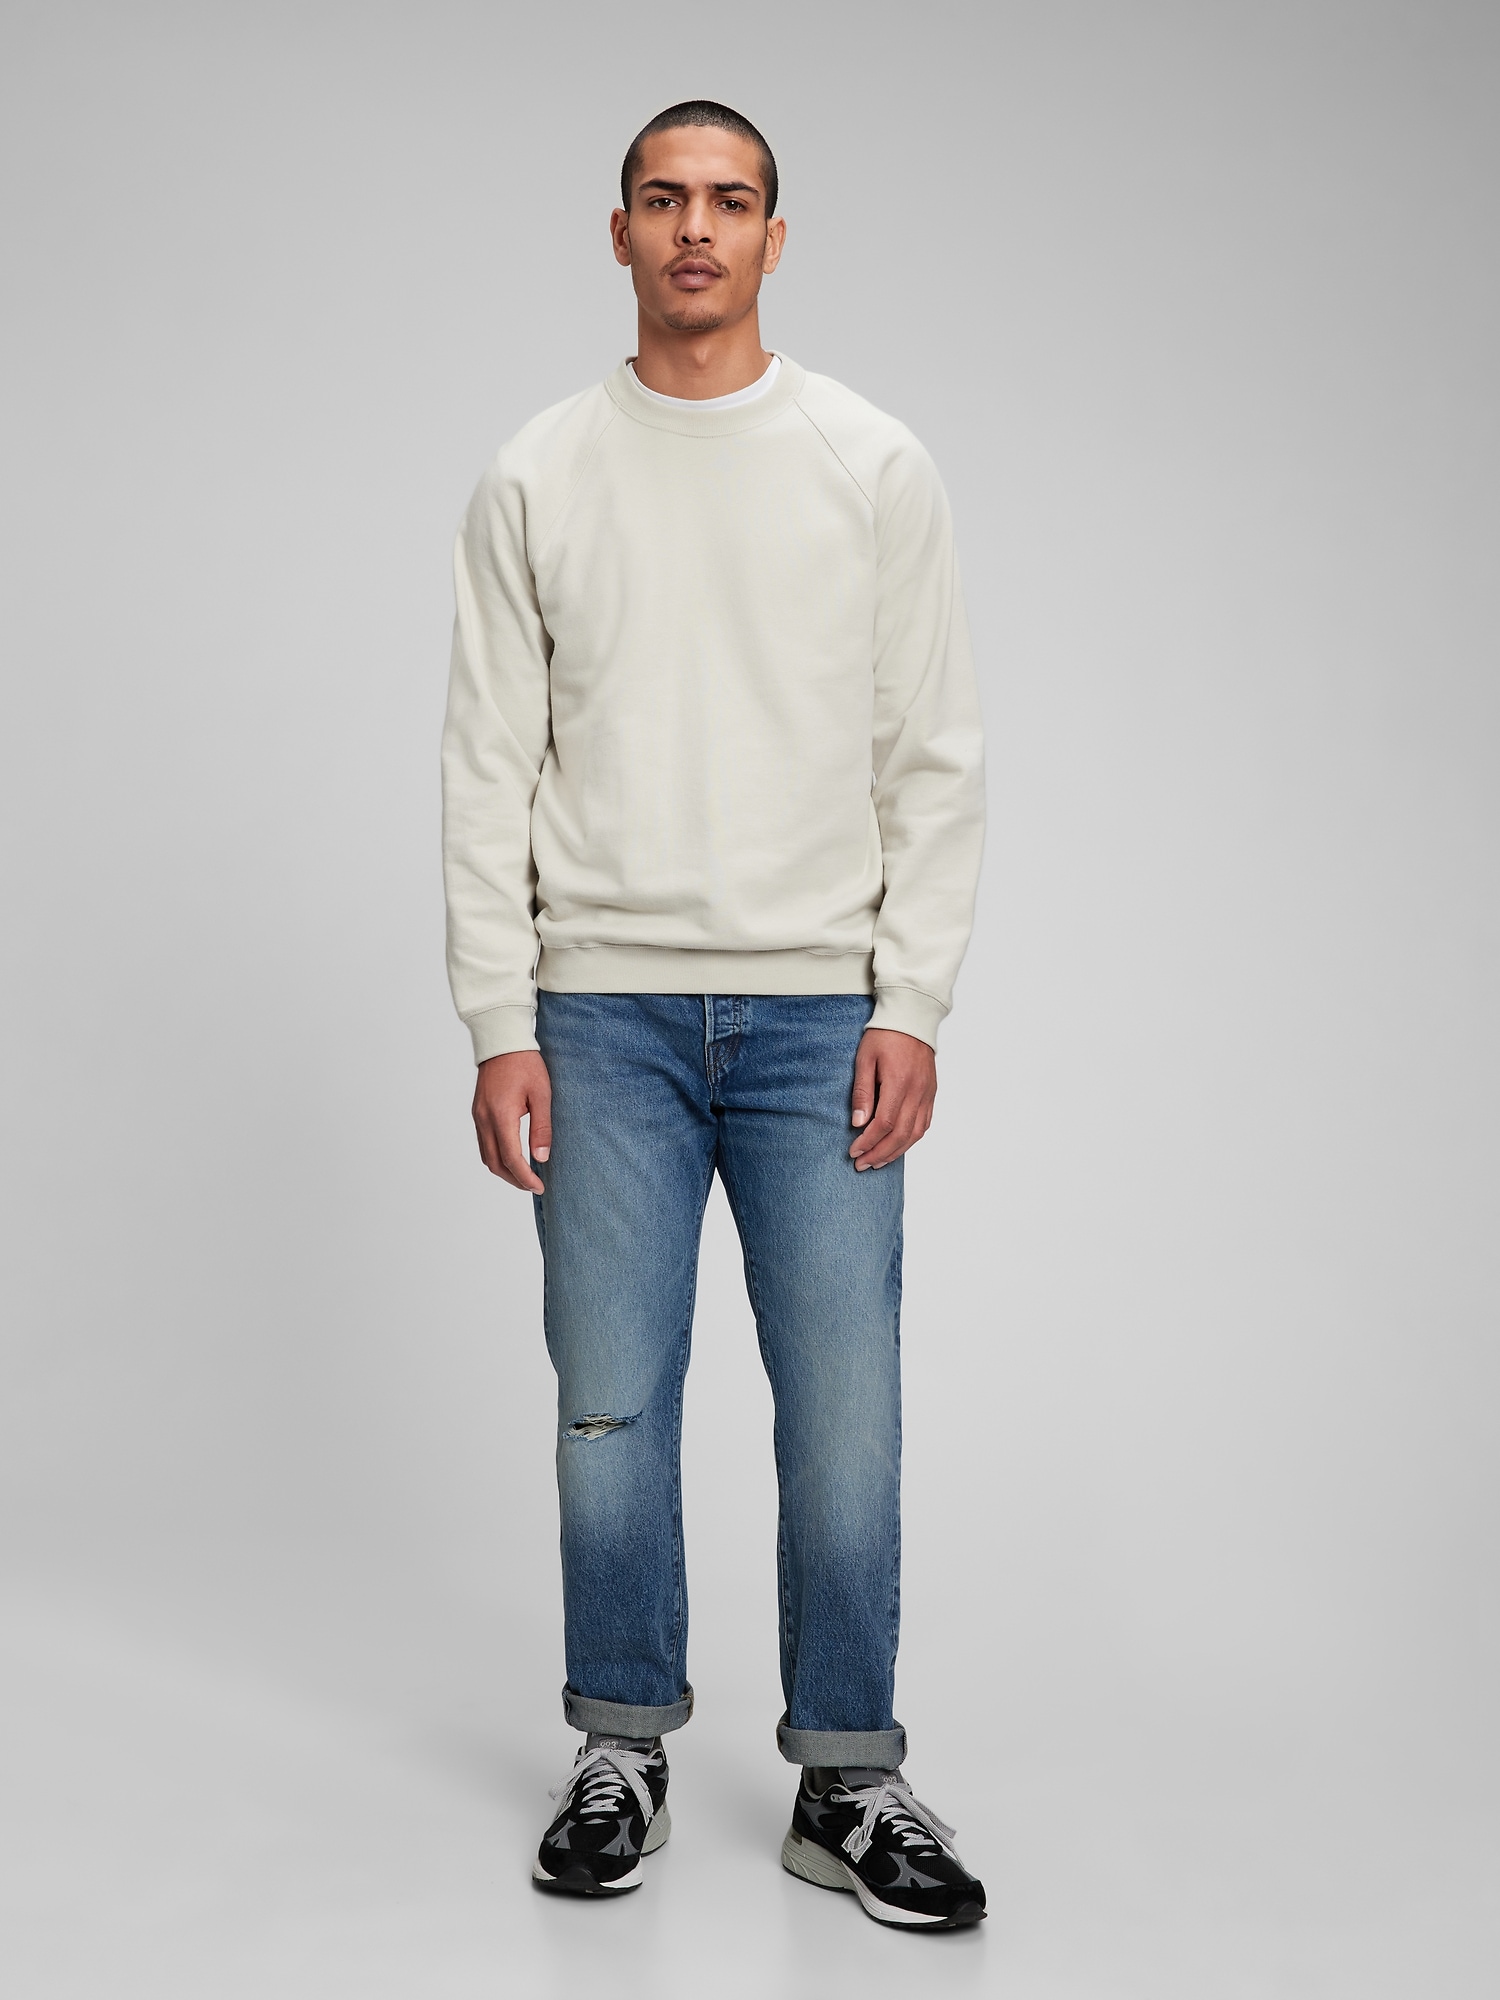 Button Fly '90s Original Straight Fit Jeans | Gap